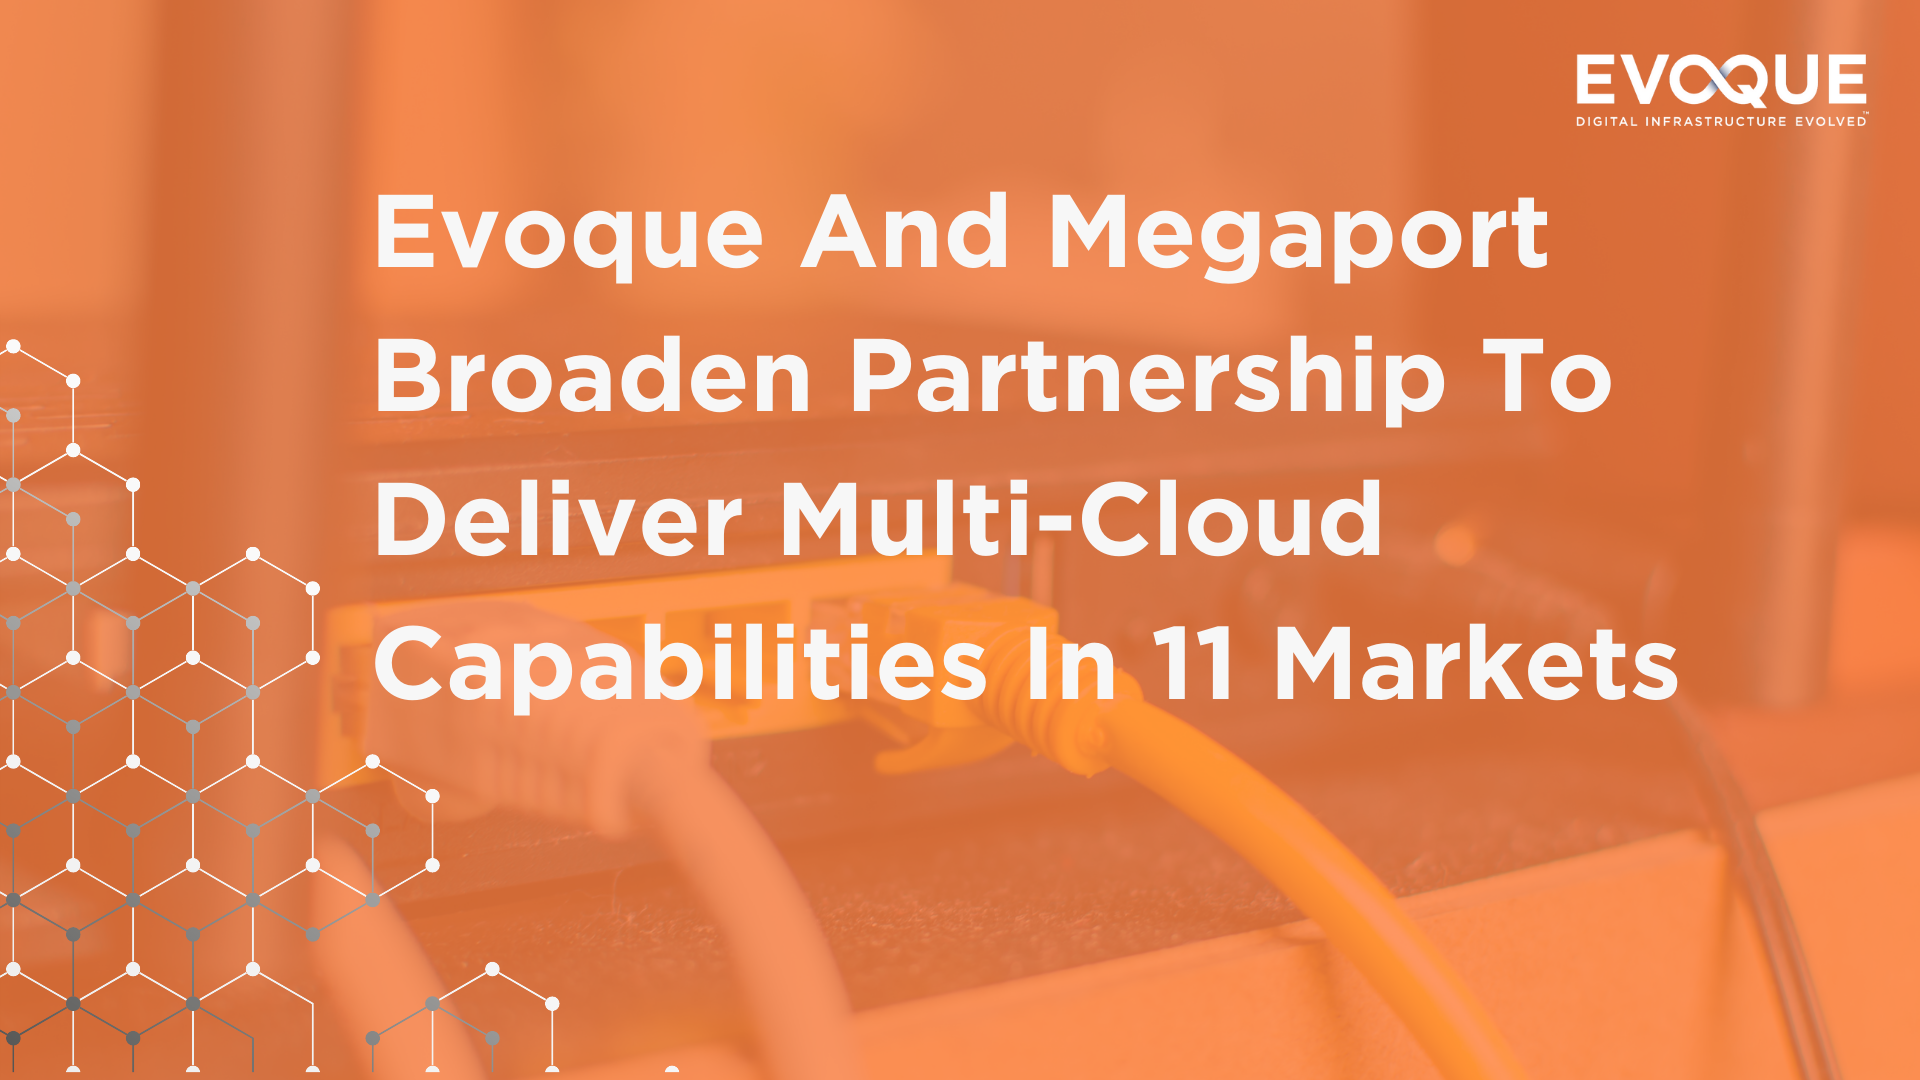 Evoque And Megaport Broaden Partnership To Deliver Multi-Cloud Capabilities In 11 Markets